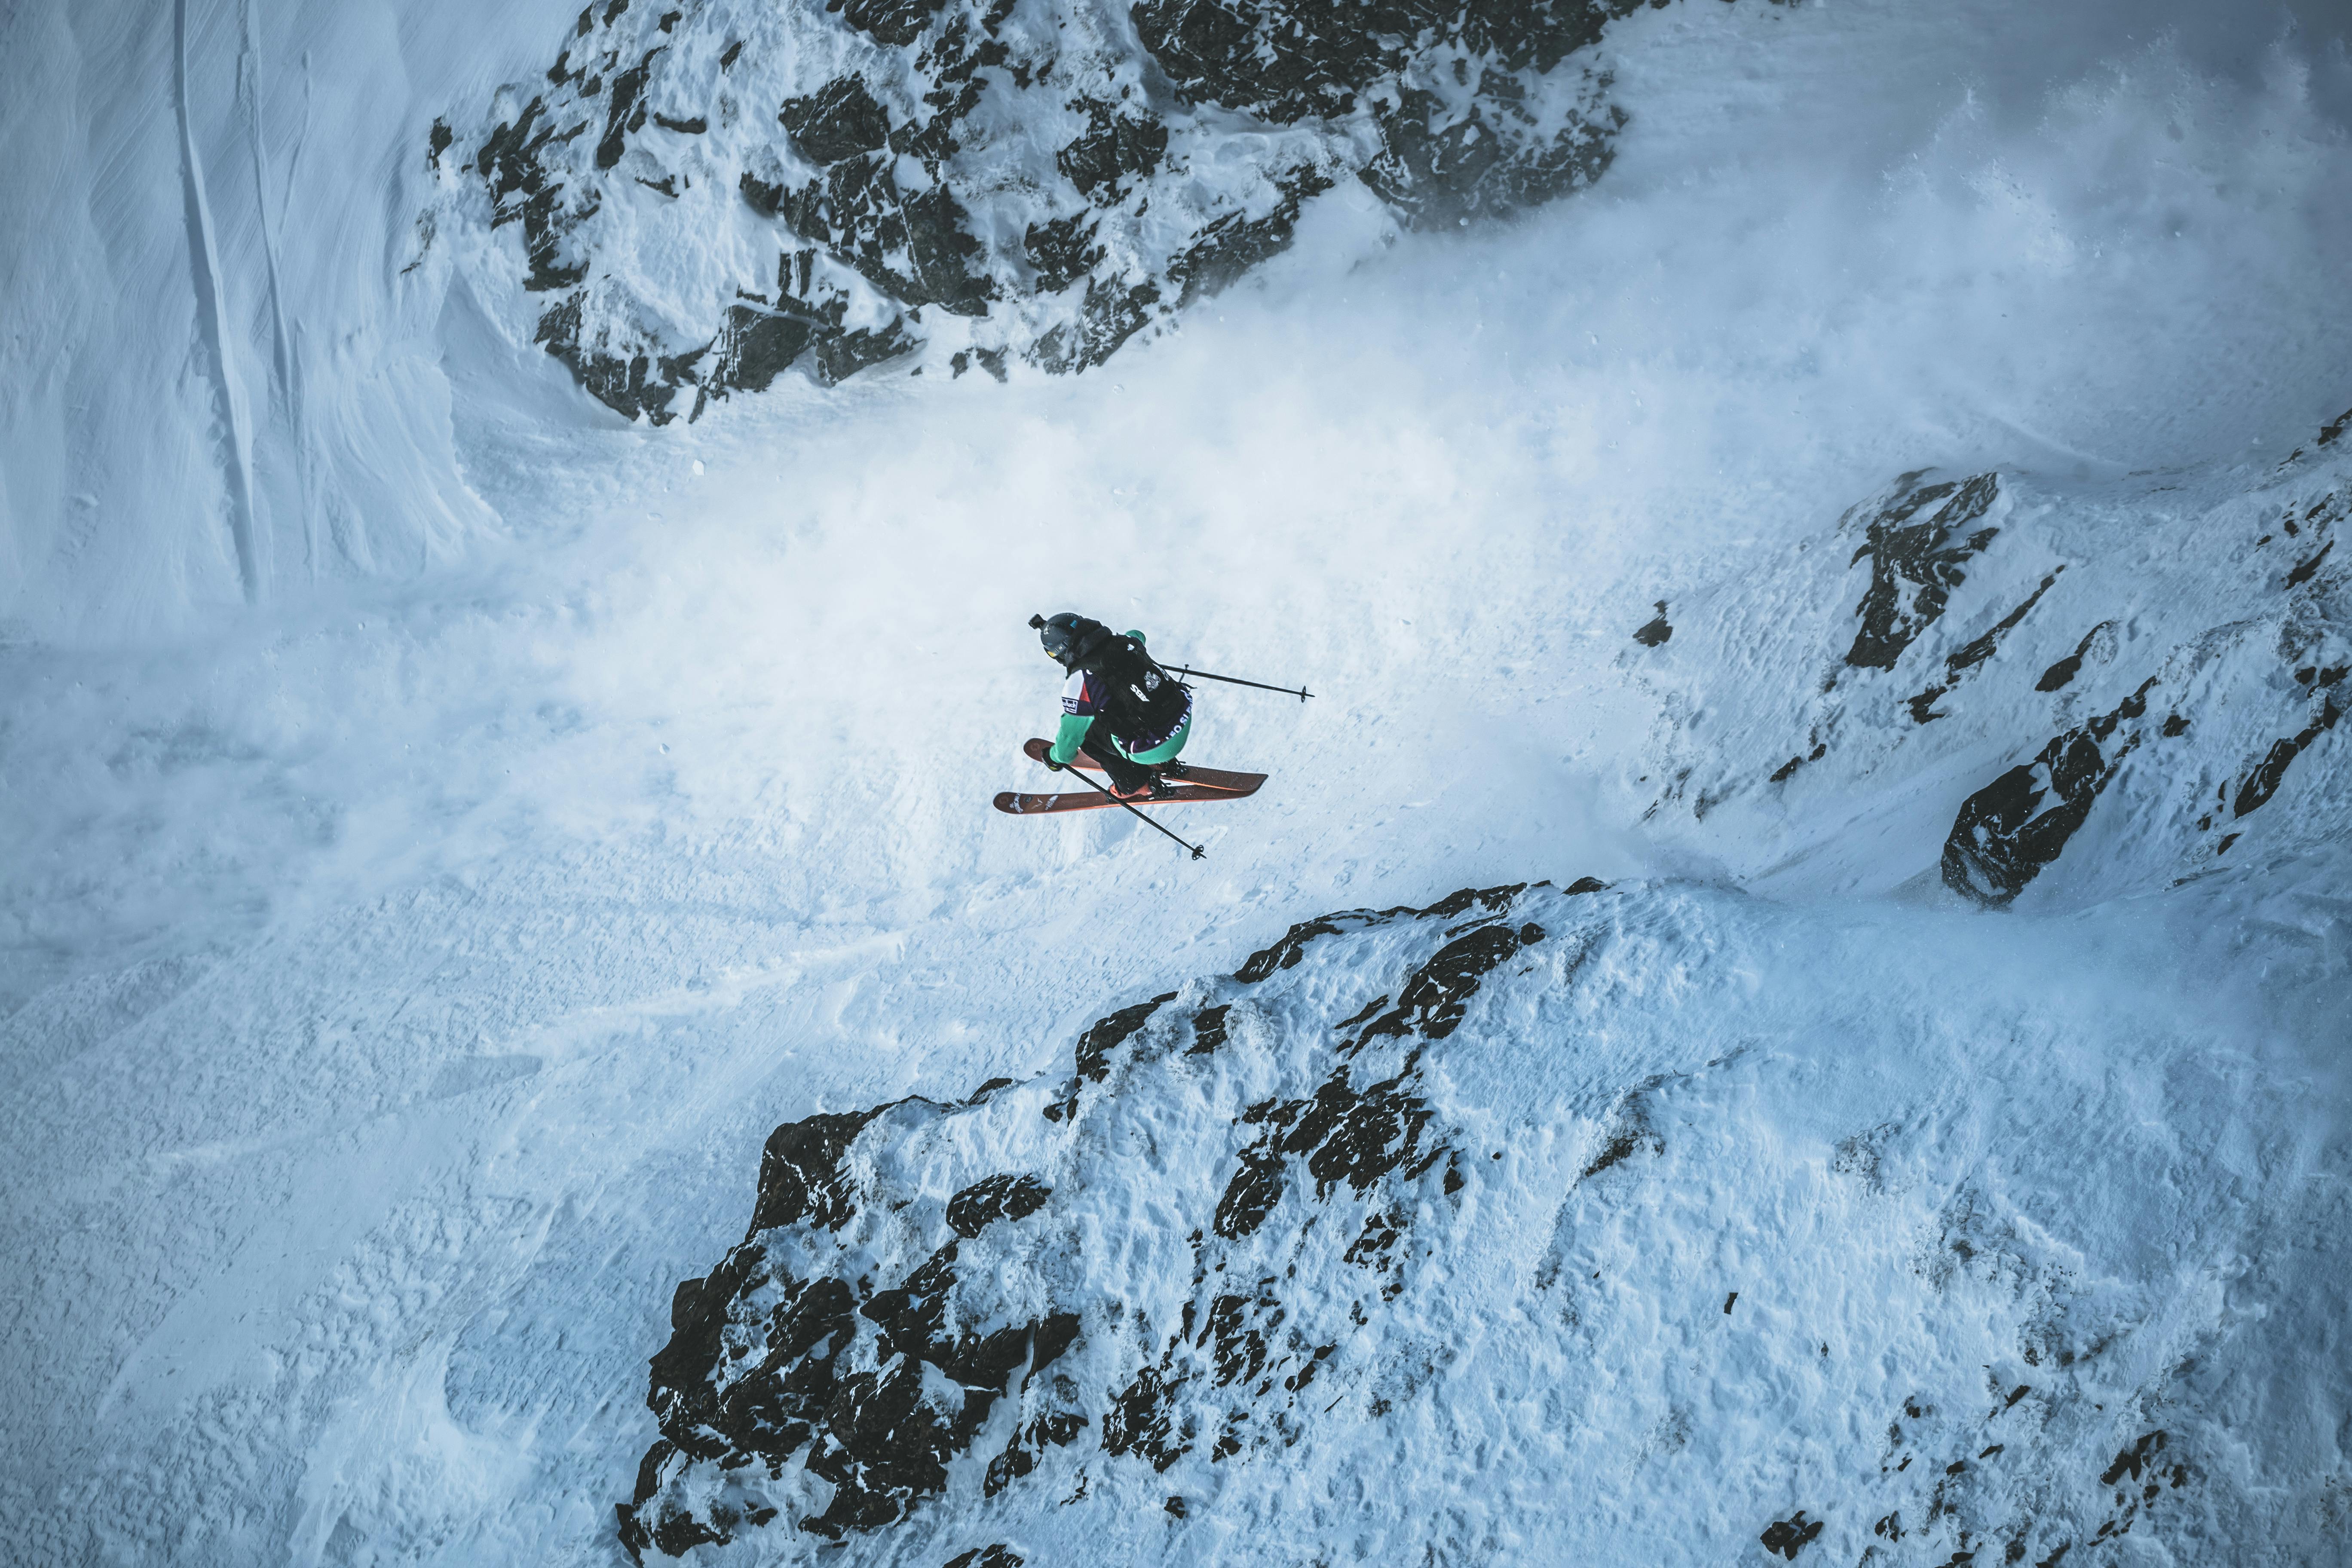 A female skier on the Tour jumps and tucks her knees into her chest. 